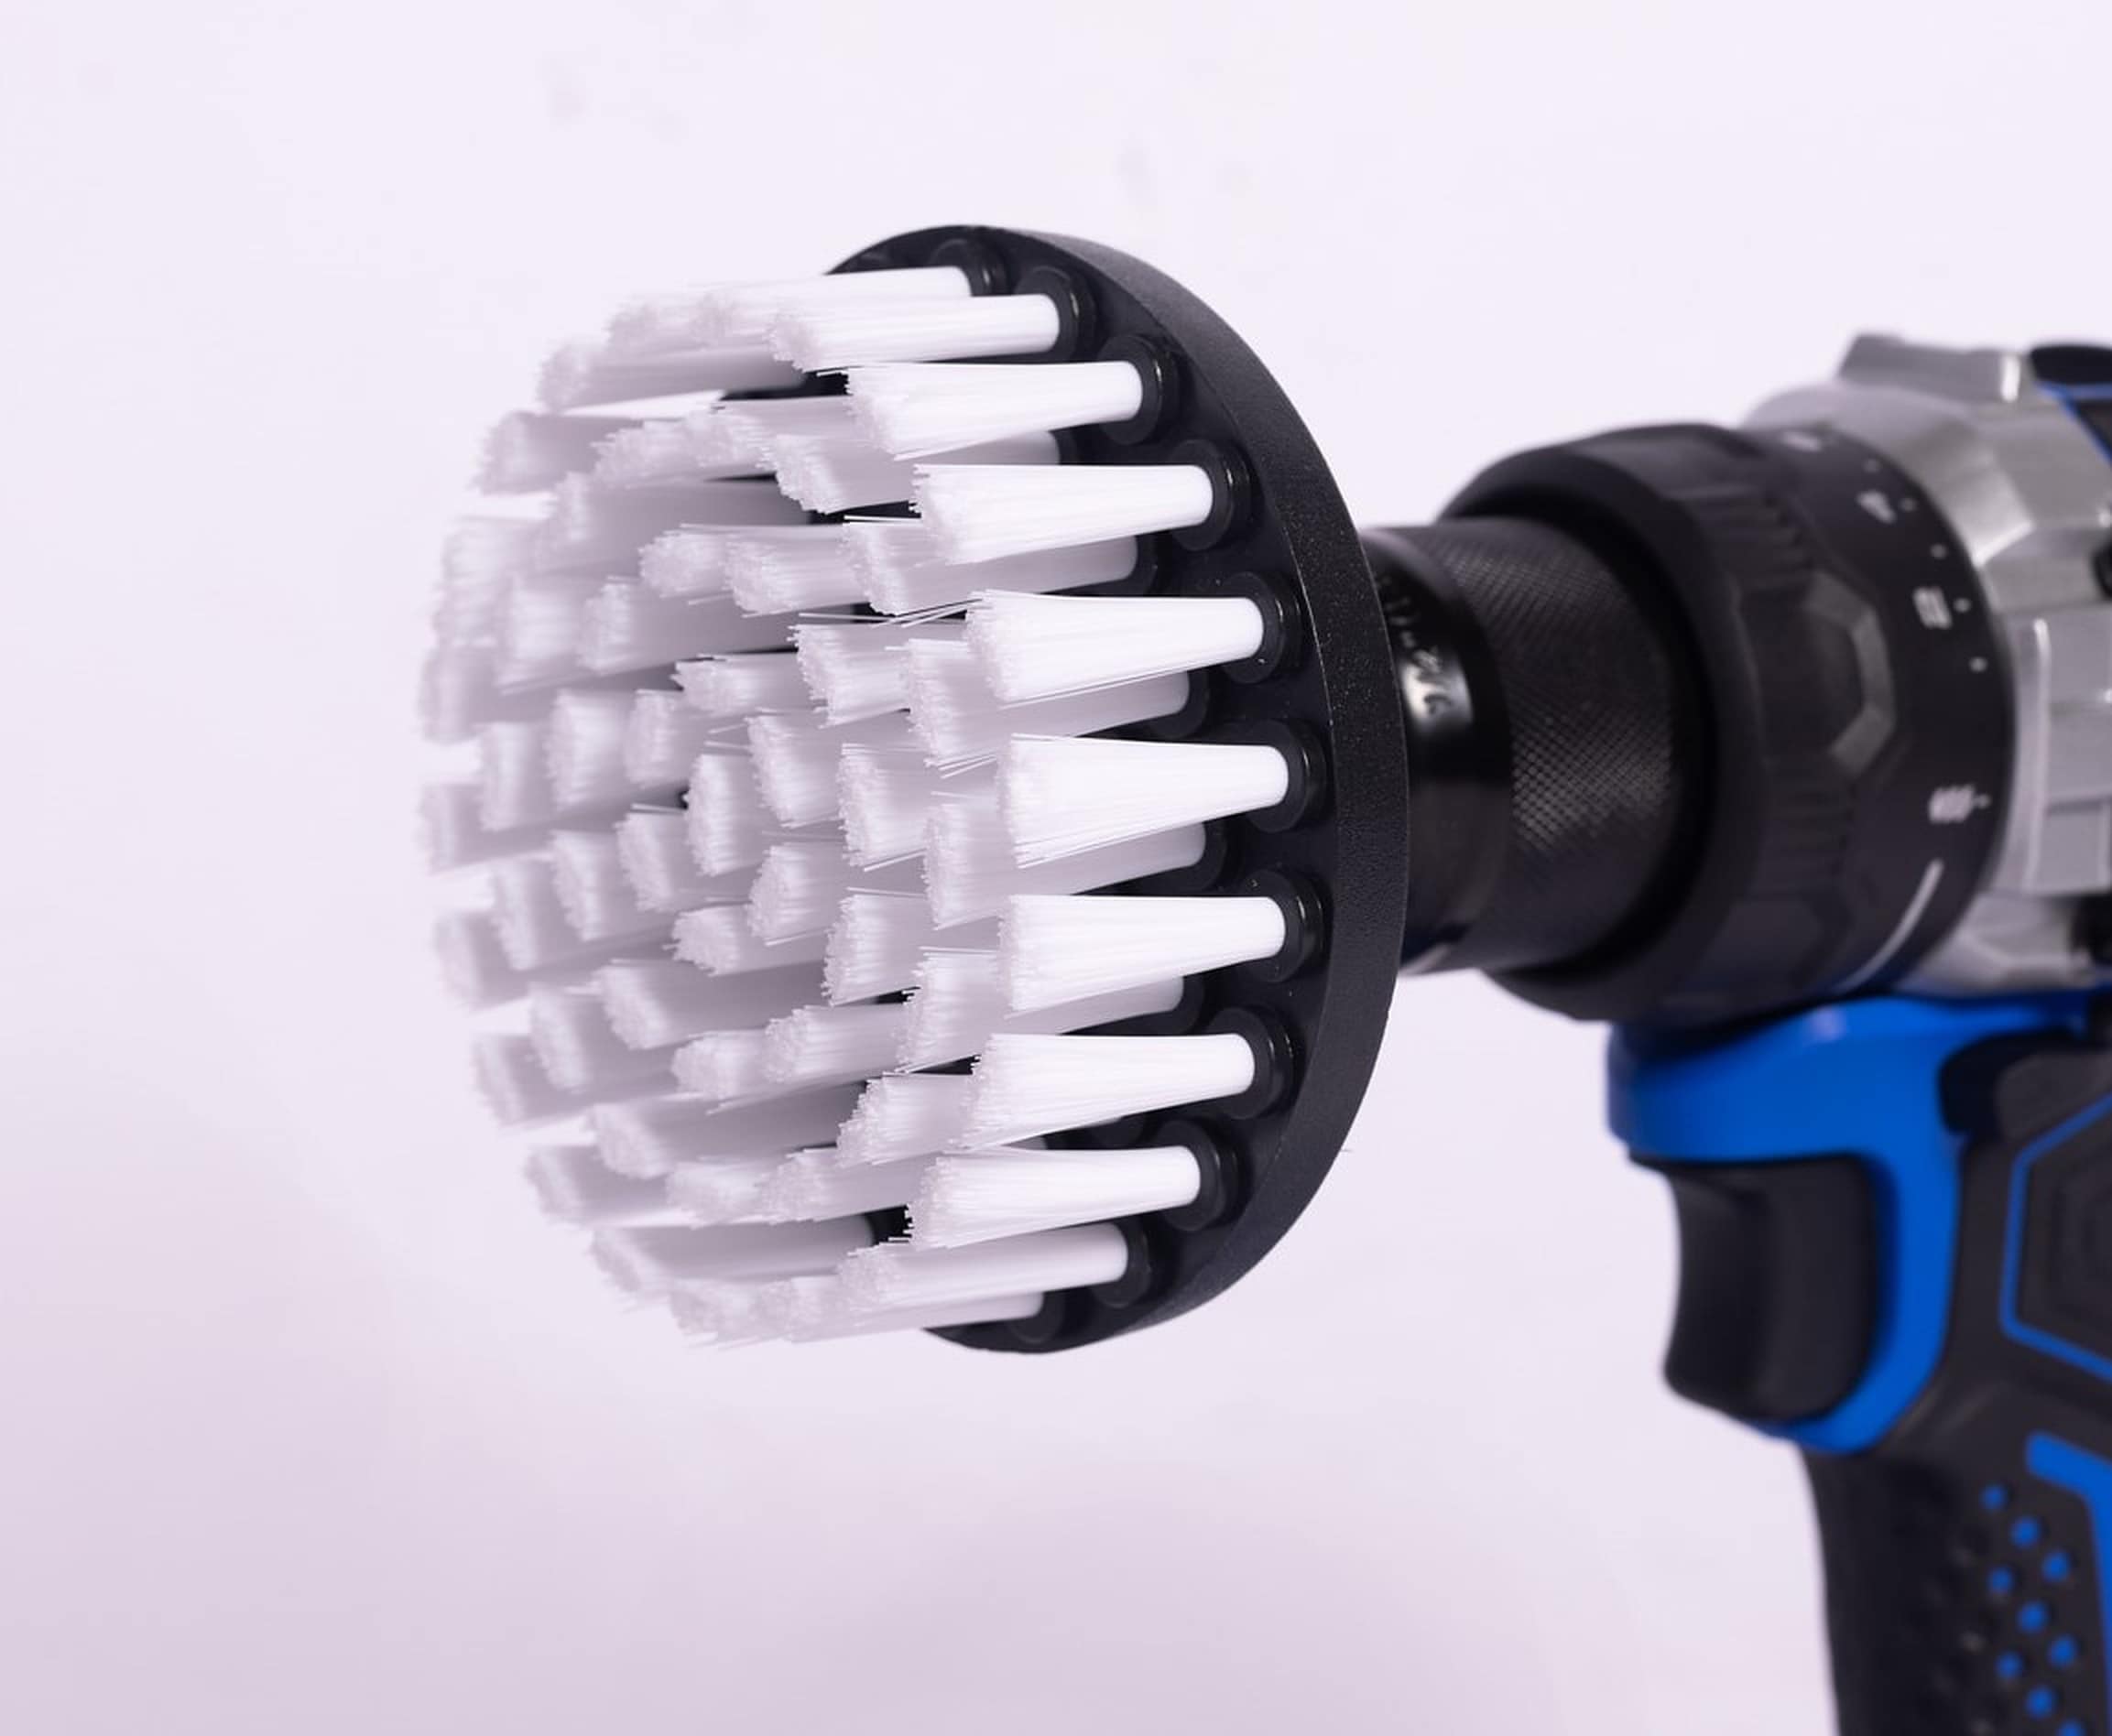 Diamond Shine Drill Brush Nylon Scrub Brush - 5-in Diameter, Extended Reach  Attachment, Fits Most Corded/Cordless Drills in the Kitchen Brushes  department at